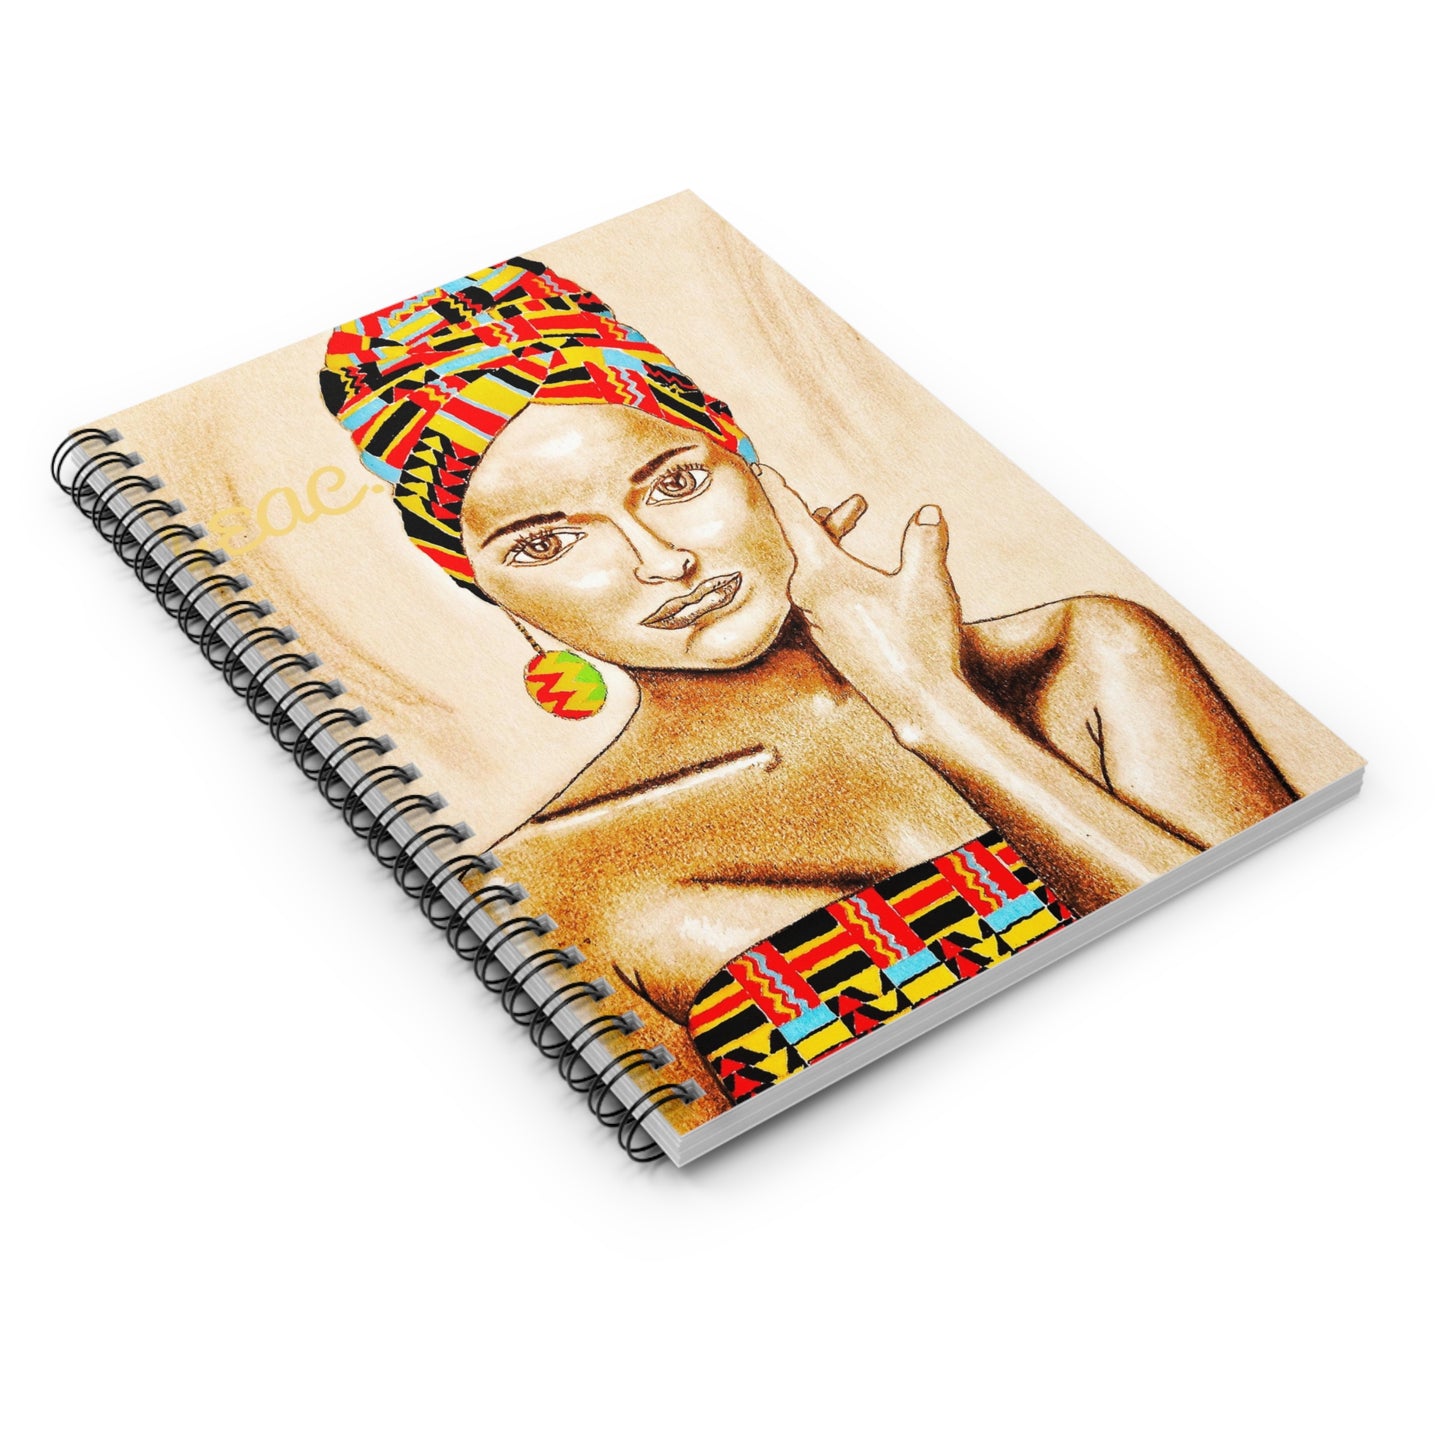 Classy Portrait Spiral Notebook - Ruled Line